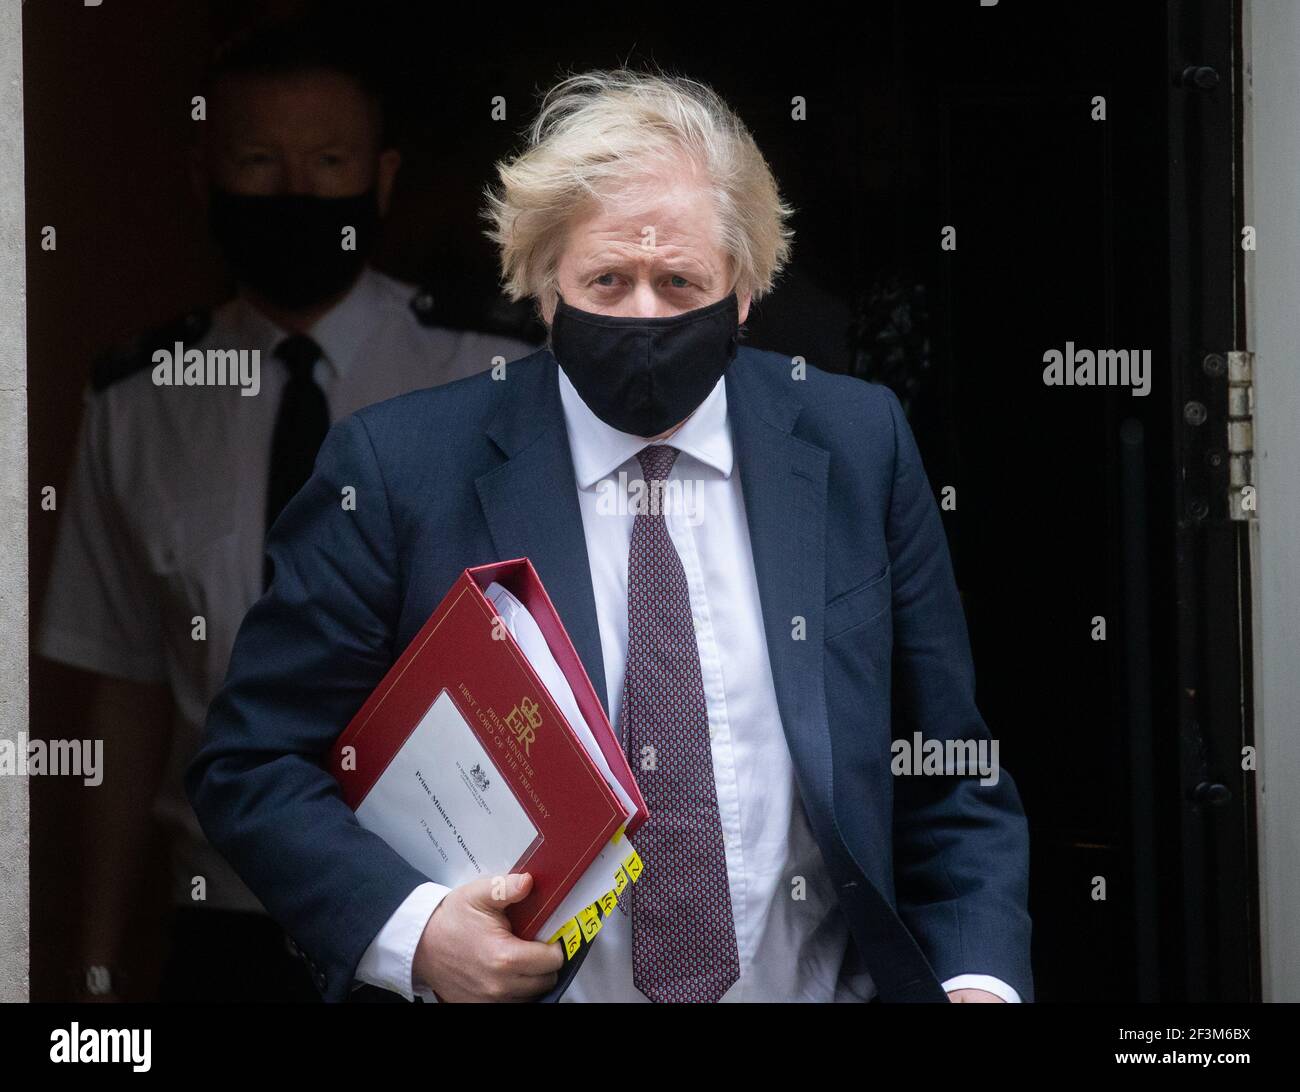 London, UK. 17th Mar, 2021. UK Prime Minister, Boris Johnson, leaves Number 10 Downing Street, to go to the House of Commons for Prime Minister's Questions. He will face Keir Starmer across the despatch box. Credit: Mark Thomas/Alamy Live News Stock Photo